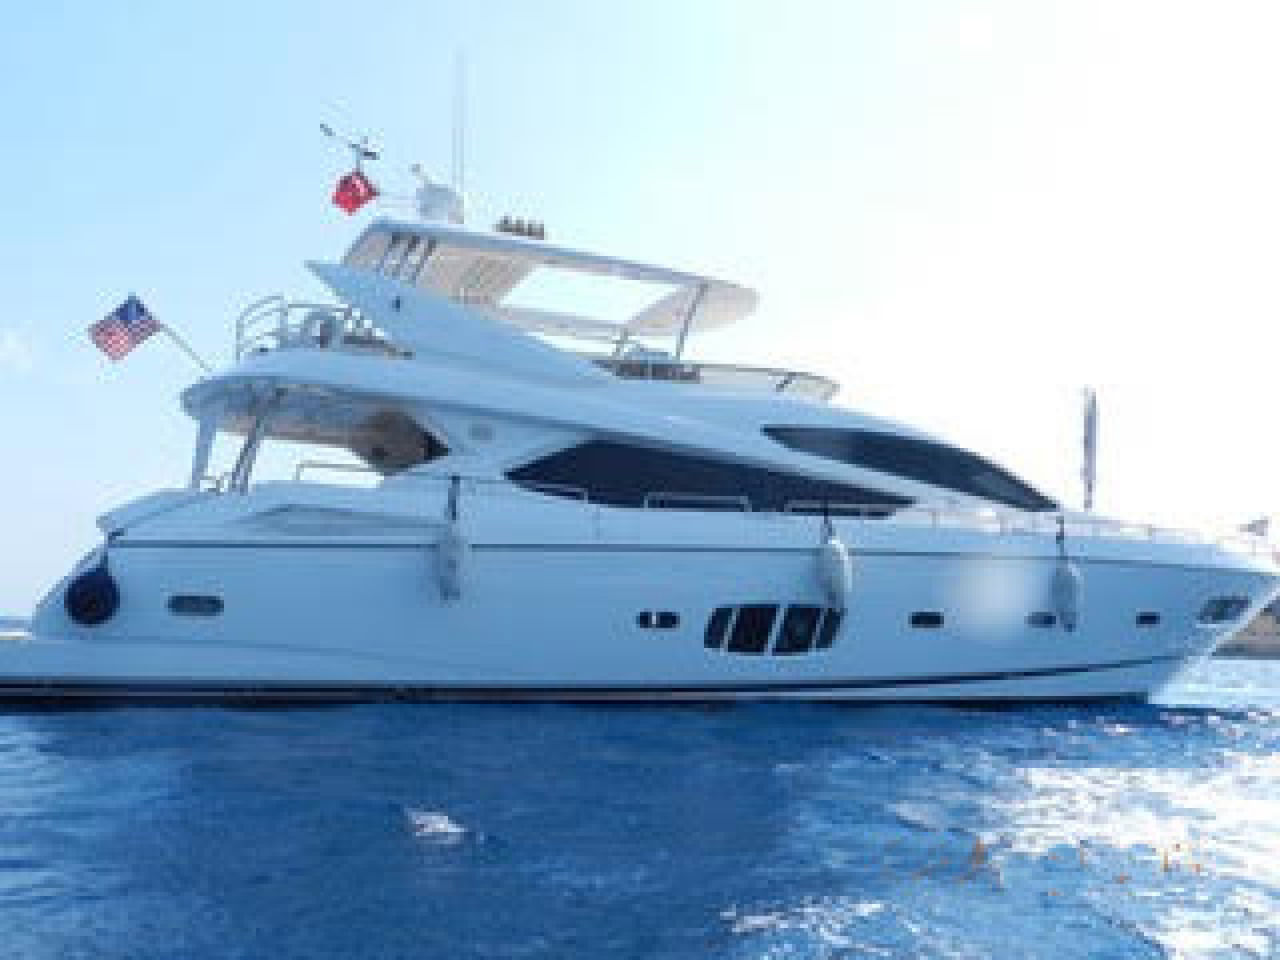 Sunseeker Yacht - picture 2